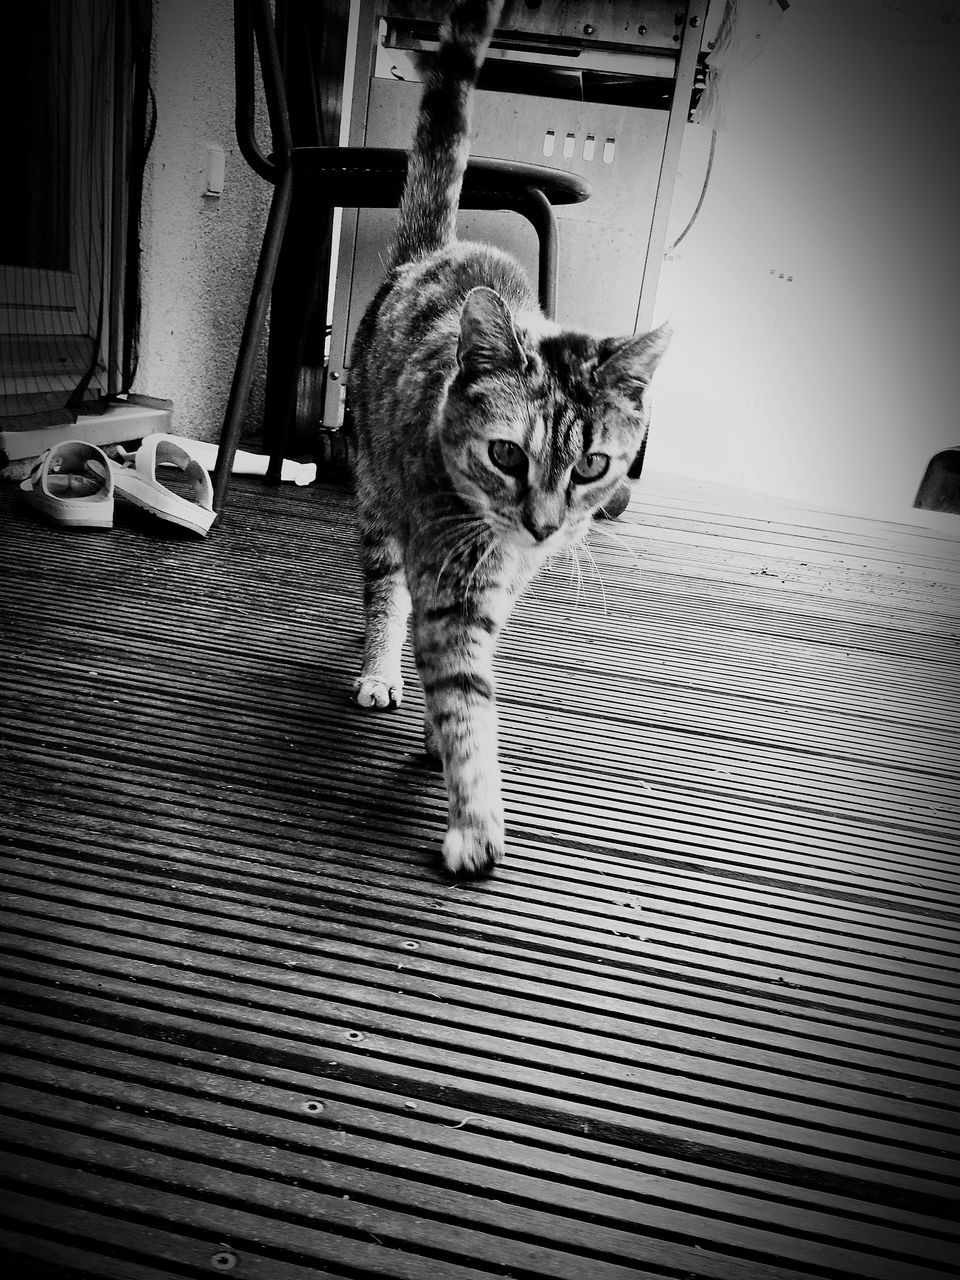 cat, domestic cat, feline, pets, domestic, domestic animals, mammal, vertebrate, one animal, no people, indoors, whisker, looking at camera, portrait, flooring, home interior, day, tabby